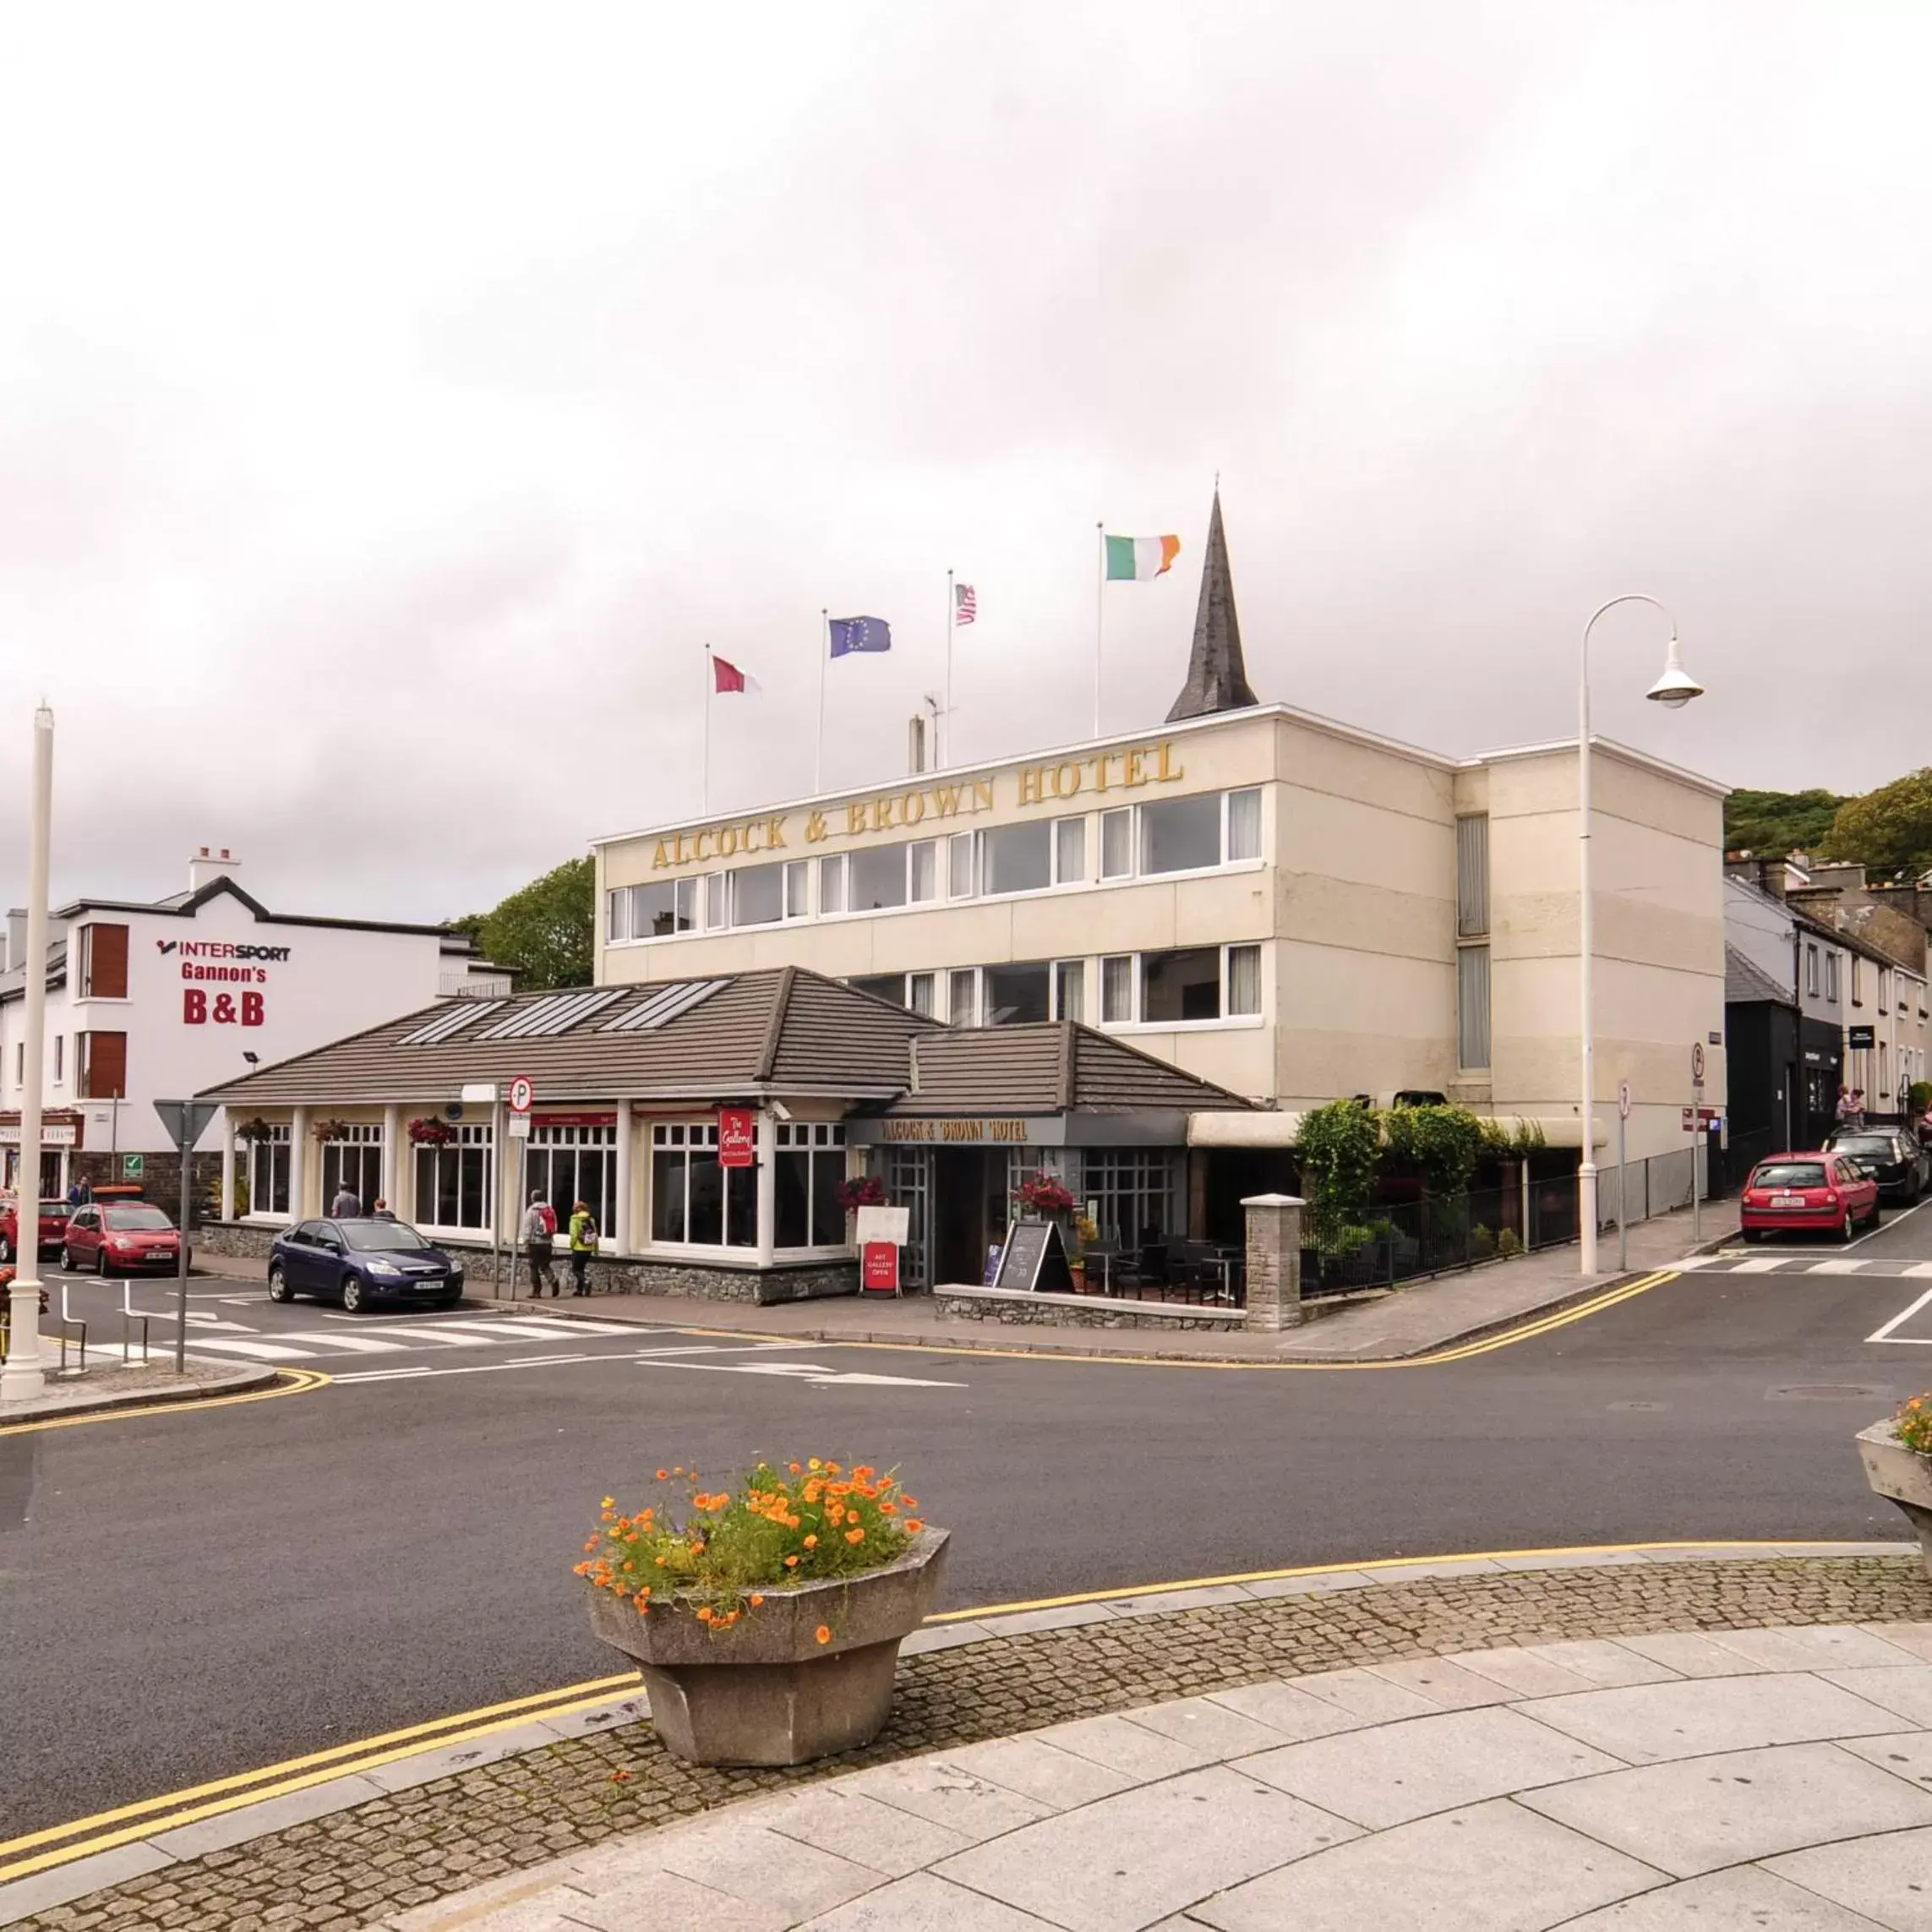 Property Building in Alcock & Brown Hotel